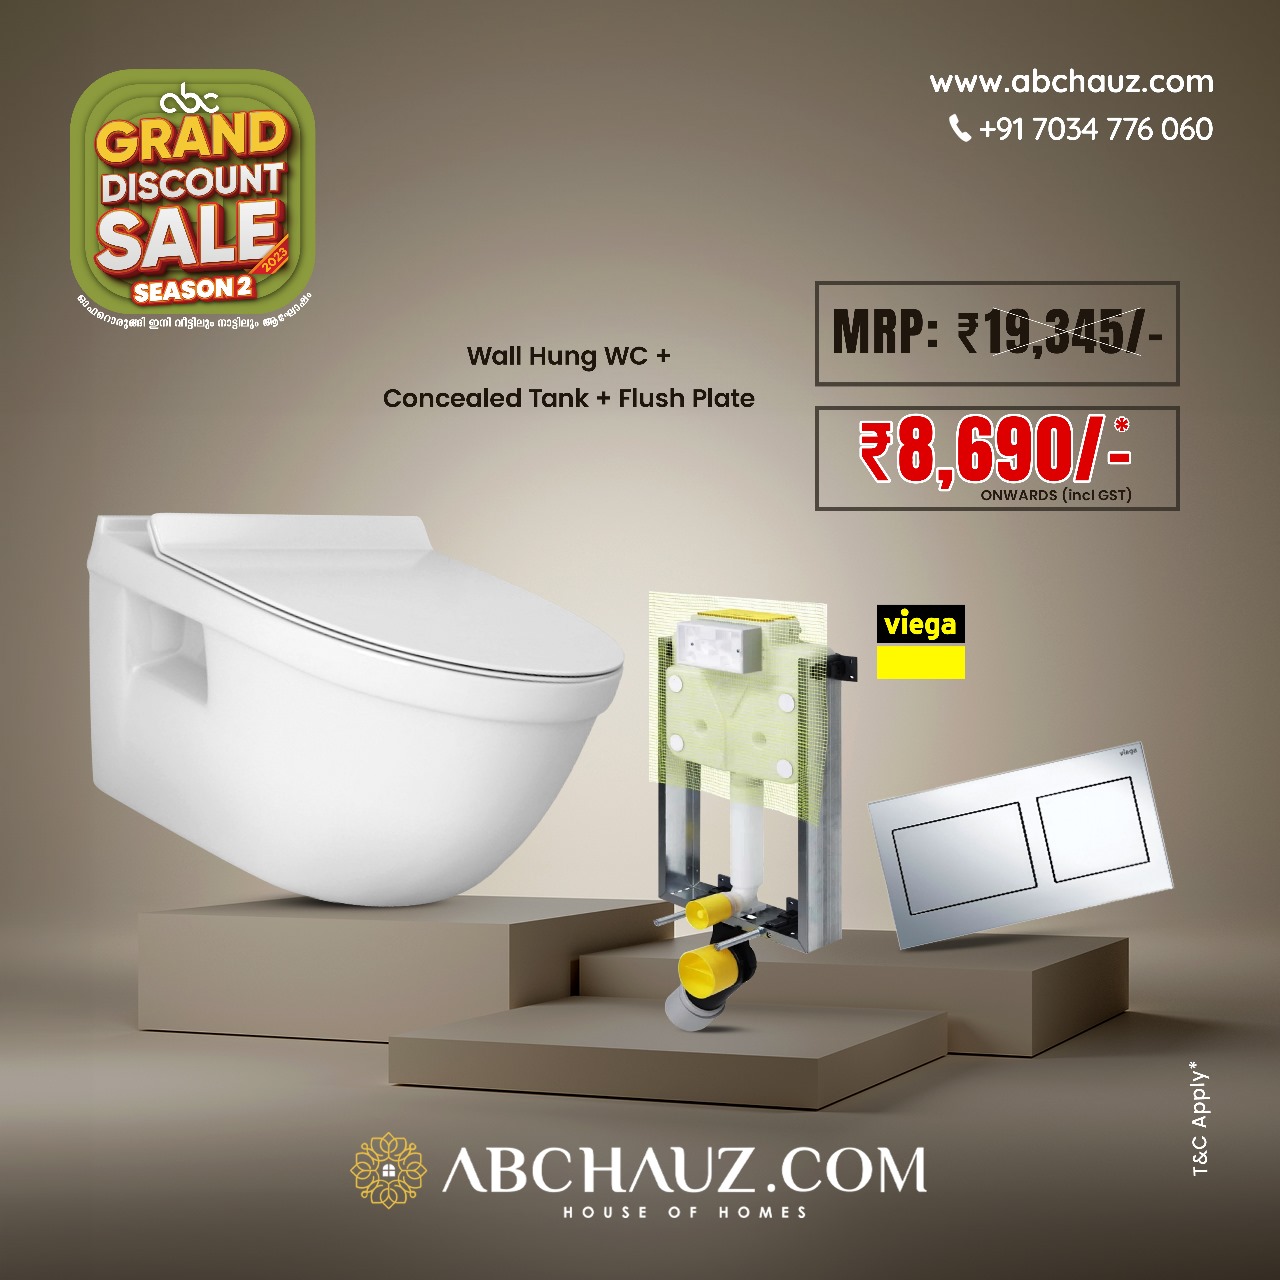 WALL HUNG TOILET COMBO OFFER